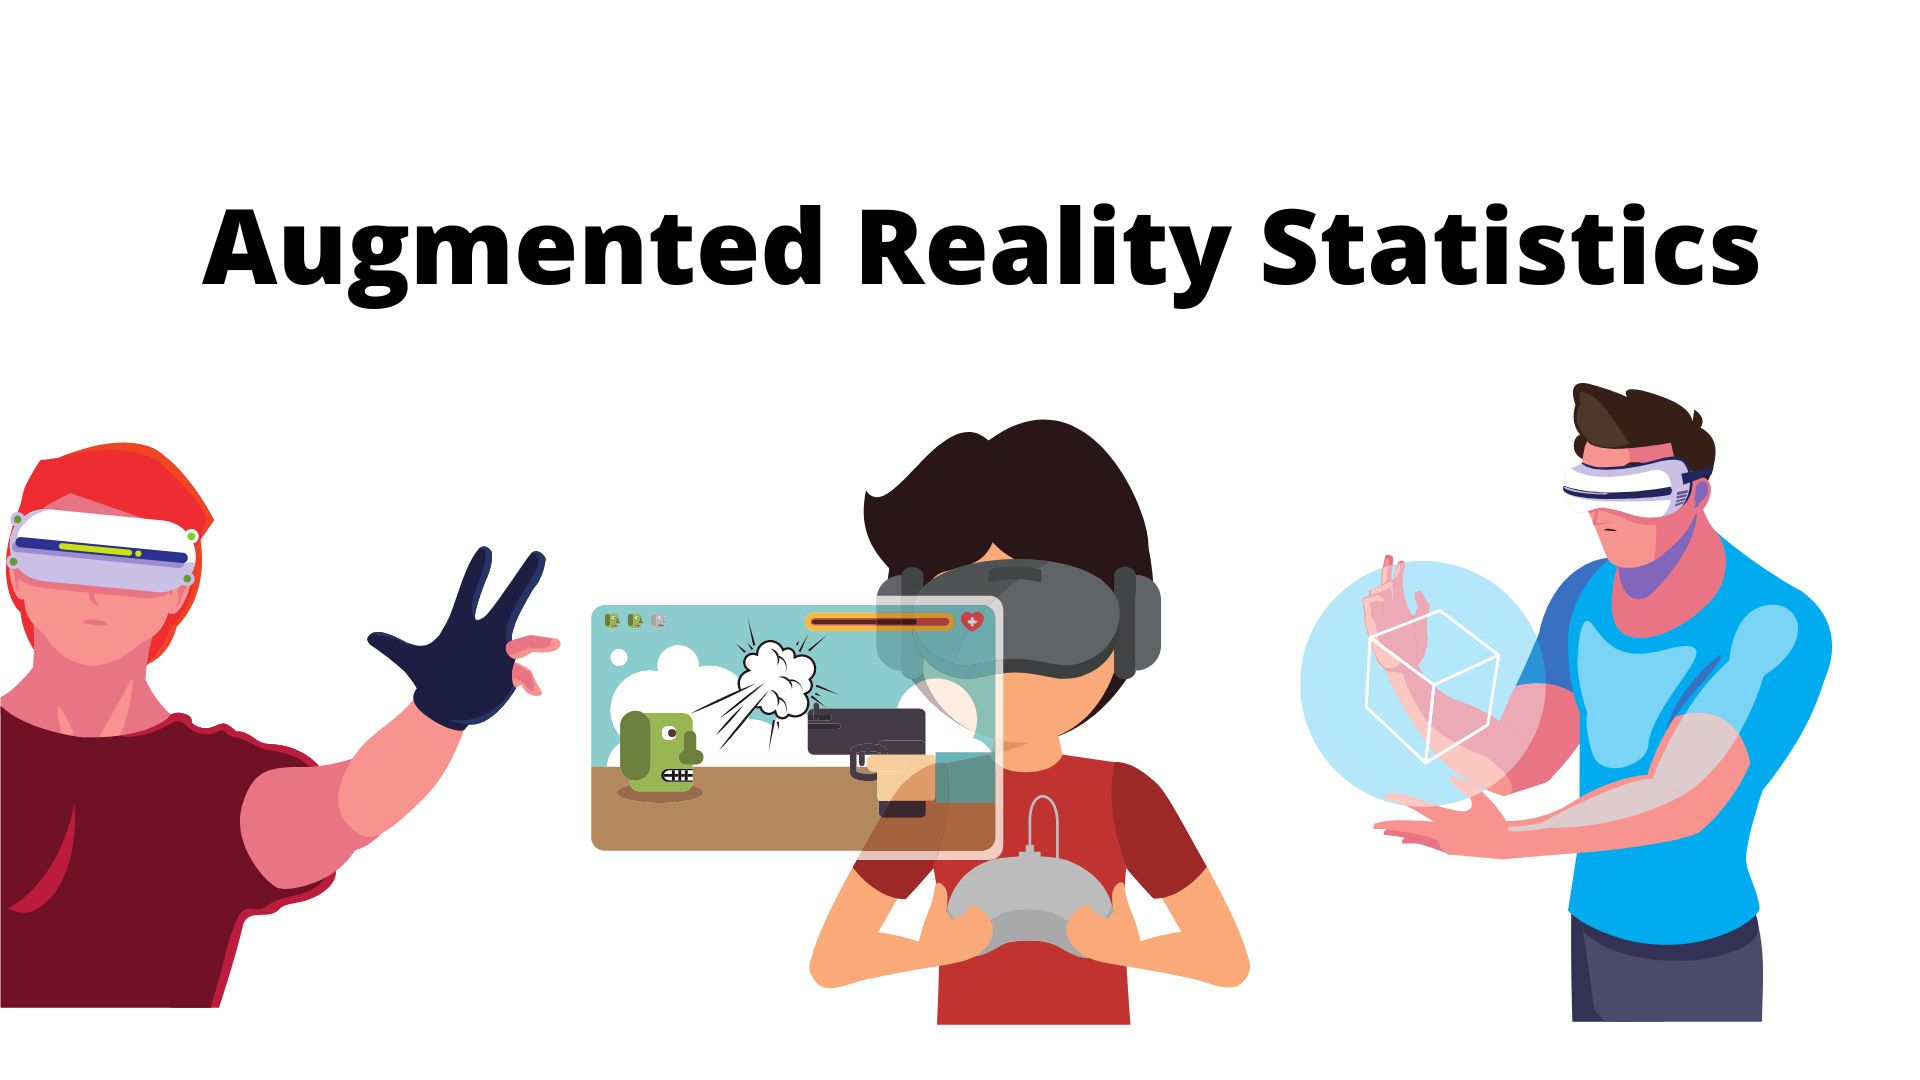 50+ Notable Augmented Reality Statistics You Should Know in 2022